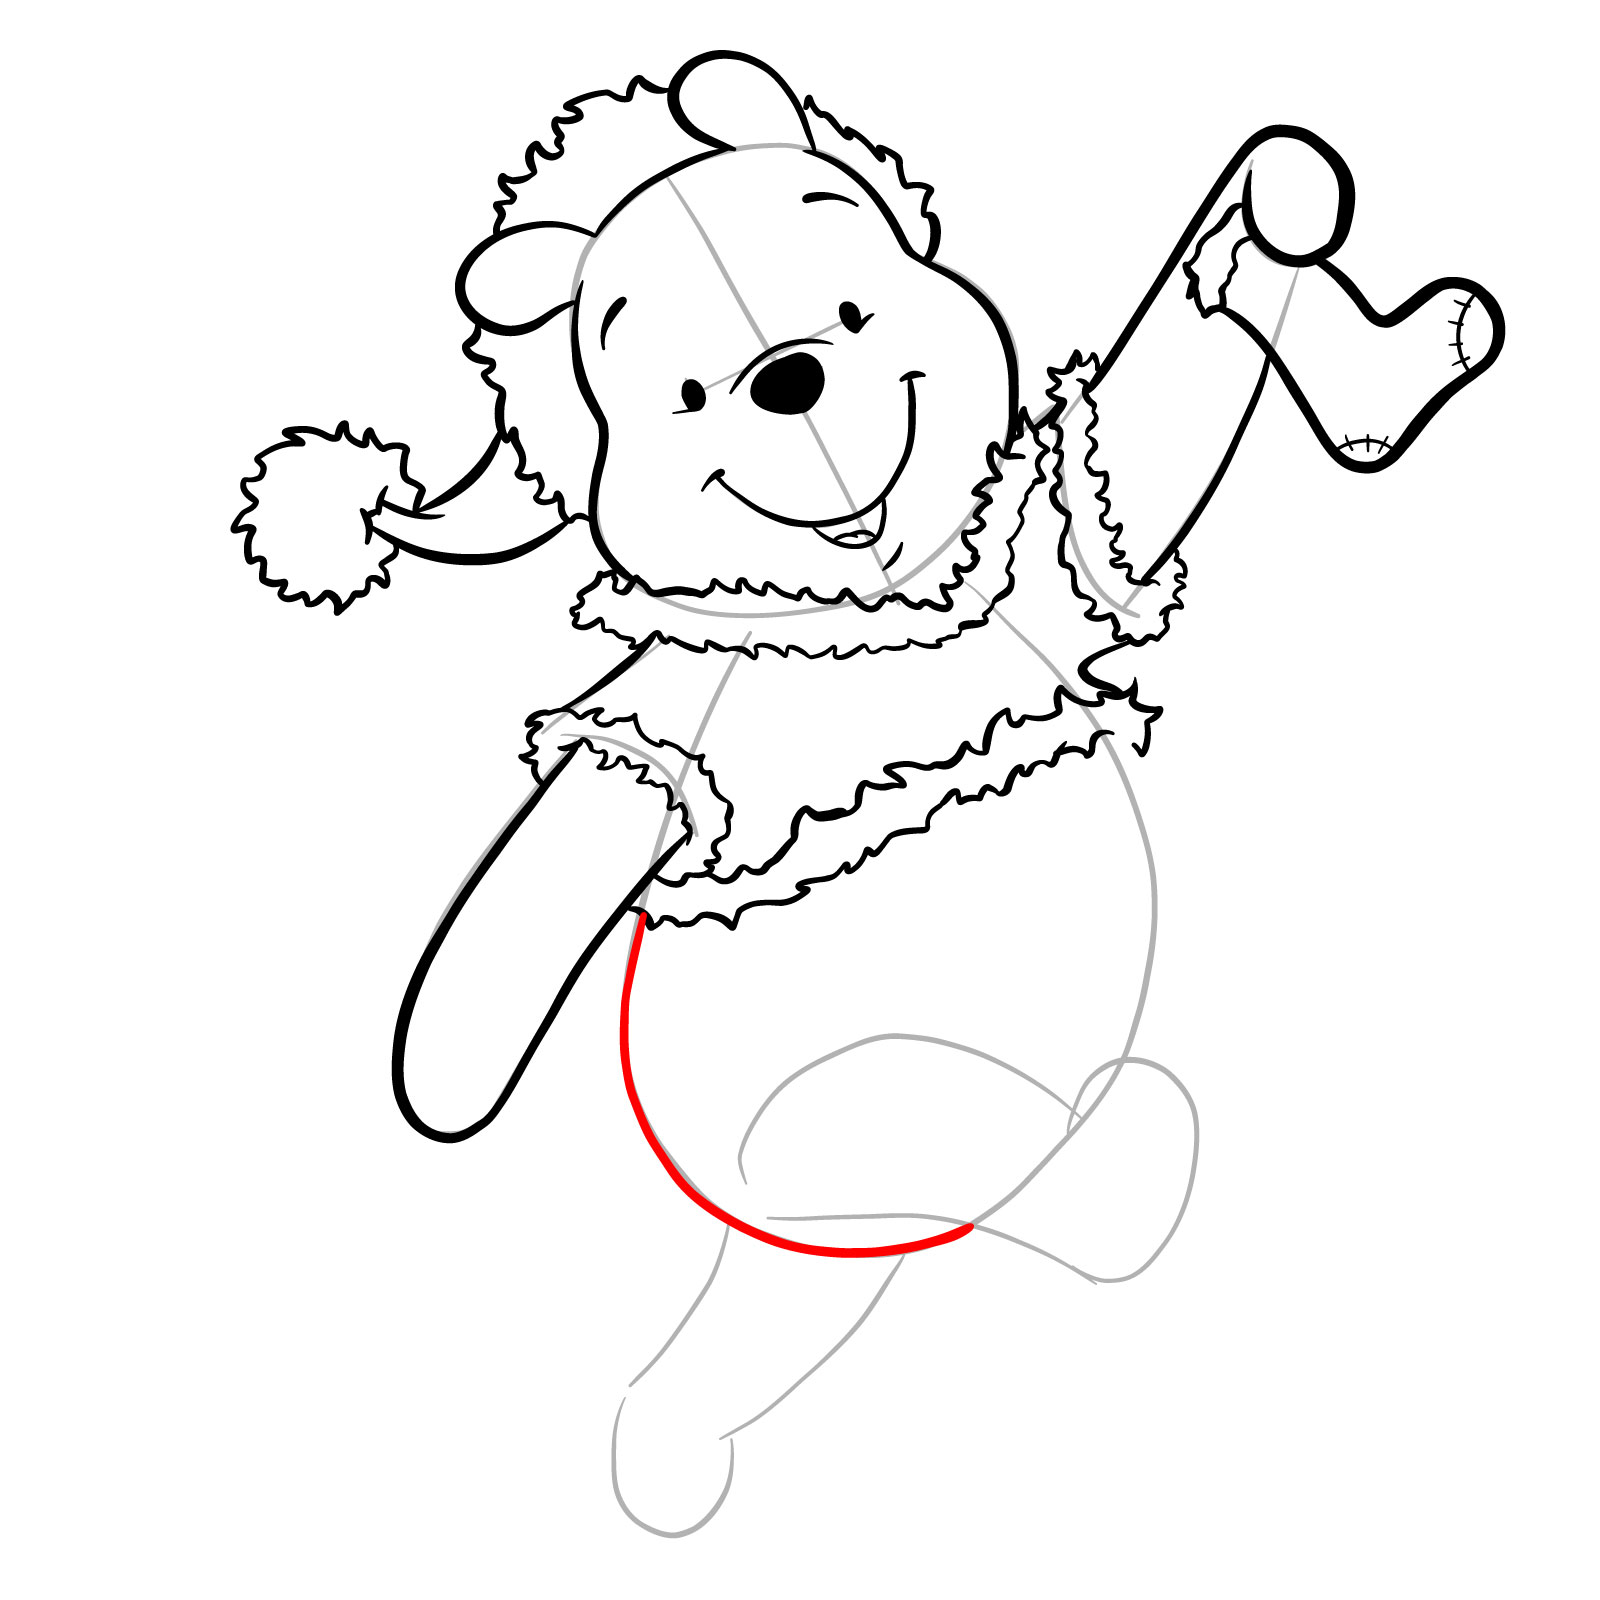 How to draw Winnie-the-Pooh Christmas style - step 23